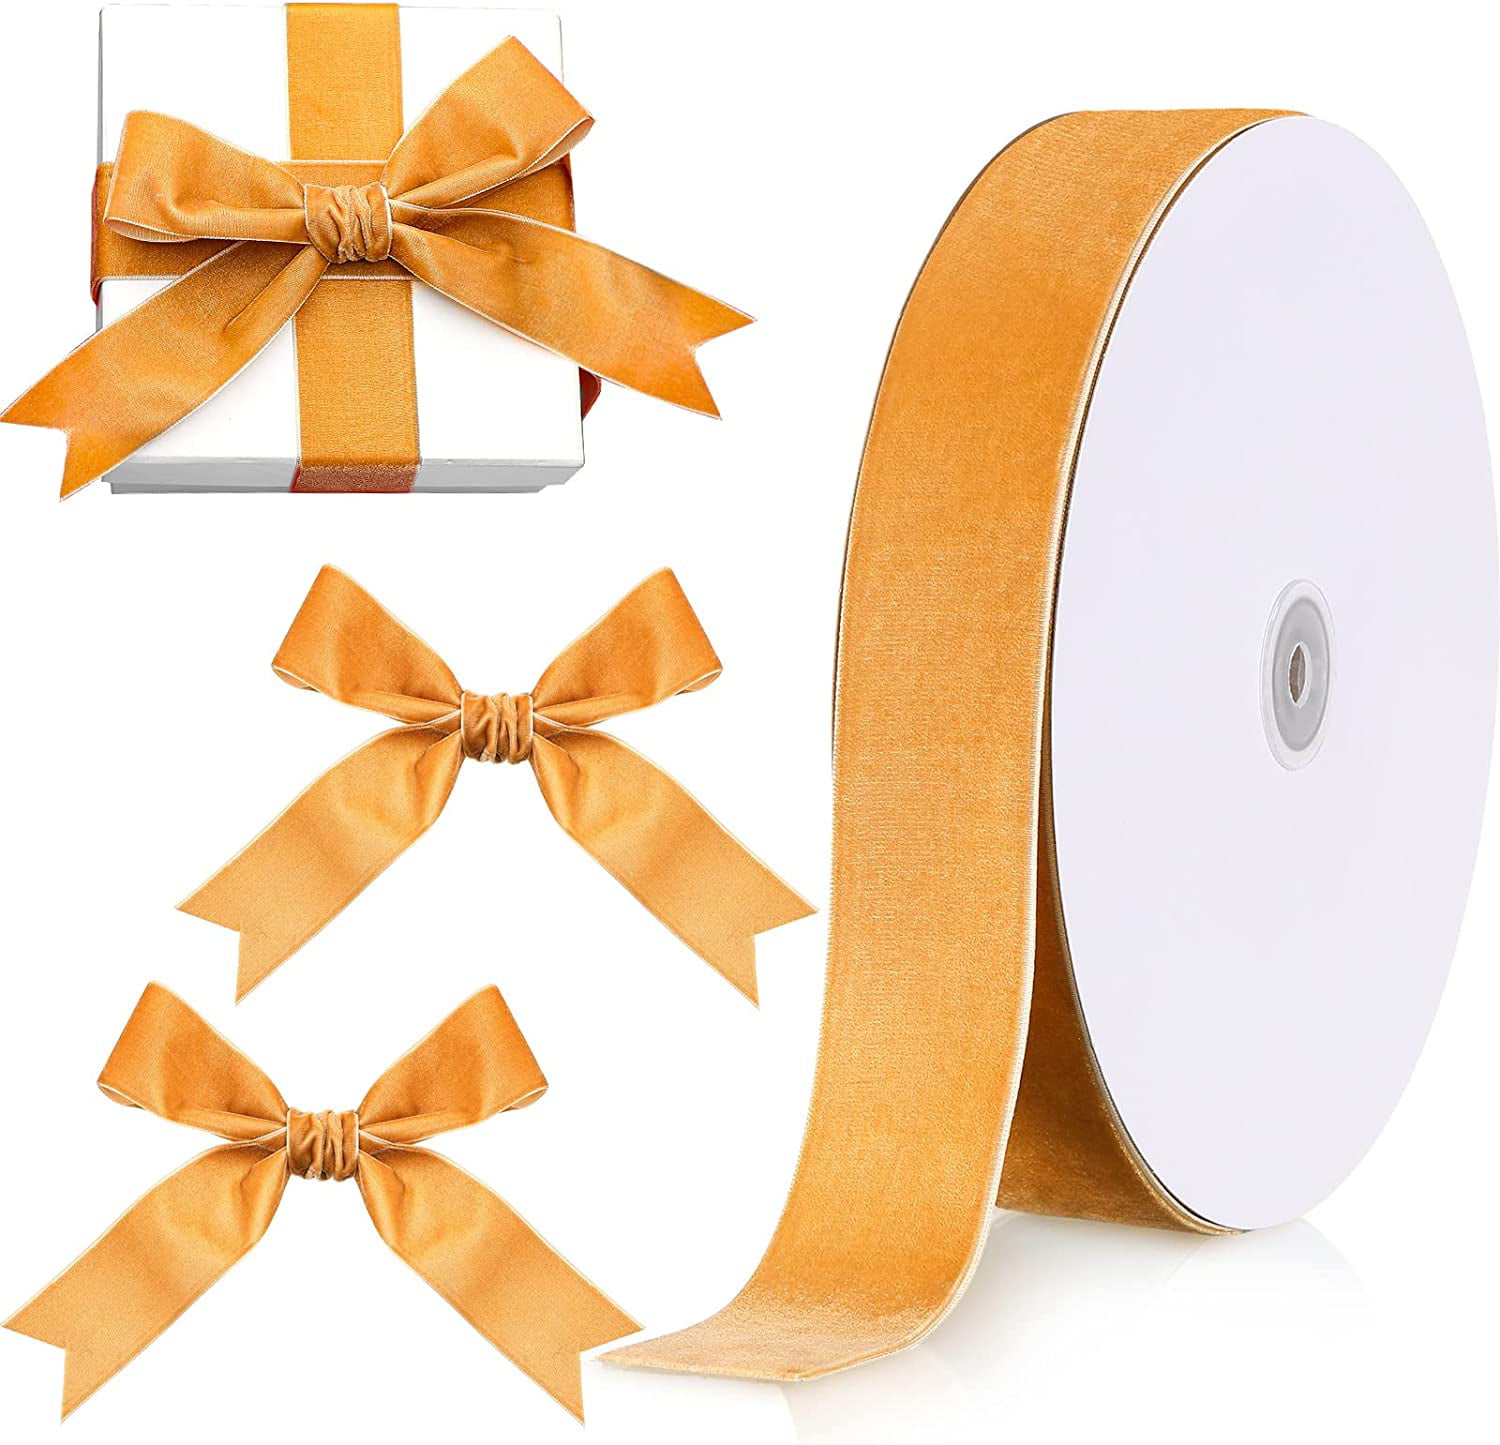 Gold Ribbon for Gift Wrapping, Satin Ribbon 1 Inches x 25 Yards for Crafts,  Hair Bows Making, Wreaths, Flower Bouquets, Wedding Decoration and DIY